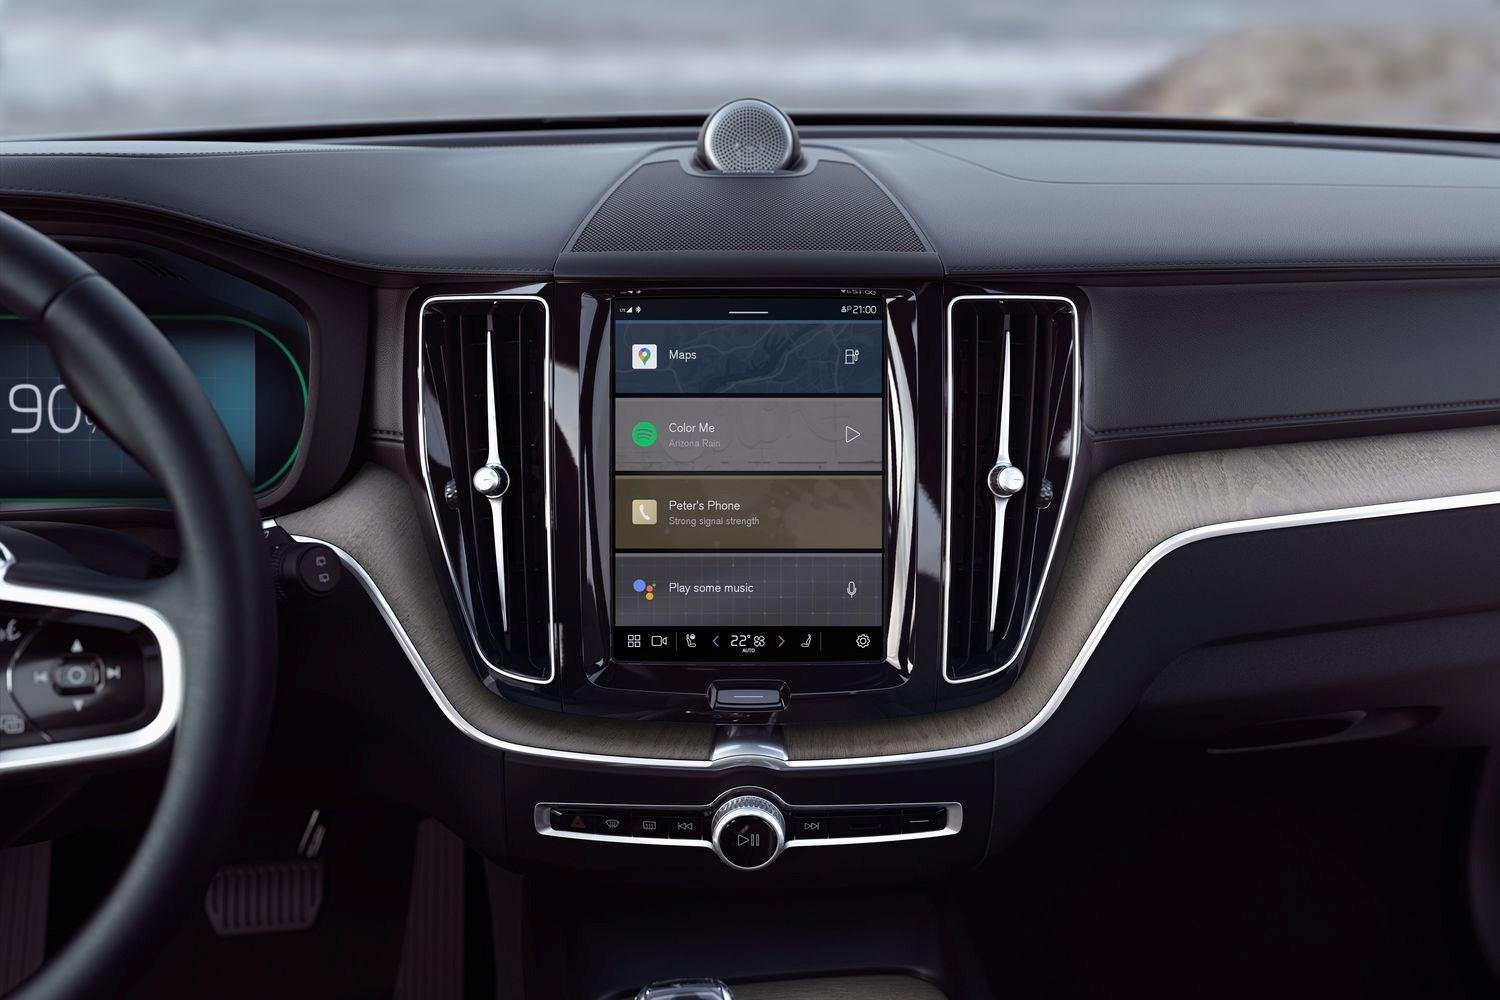 Close-up of the new Volvo XC60 Recharge infotainment system featuring Maps, Spotify and other apps